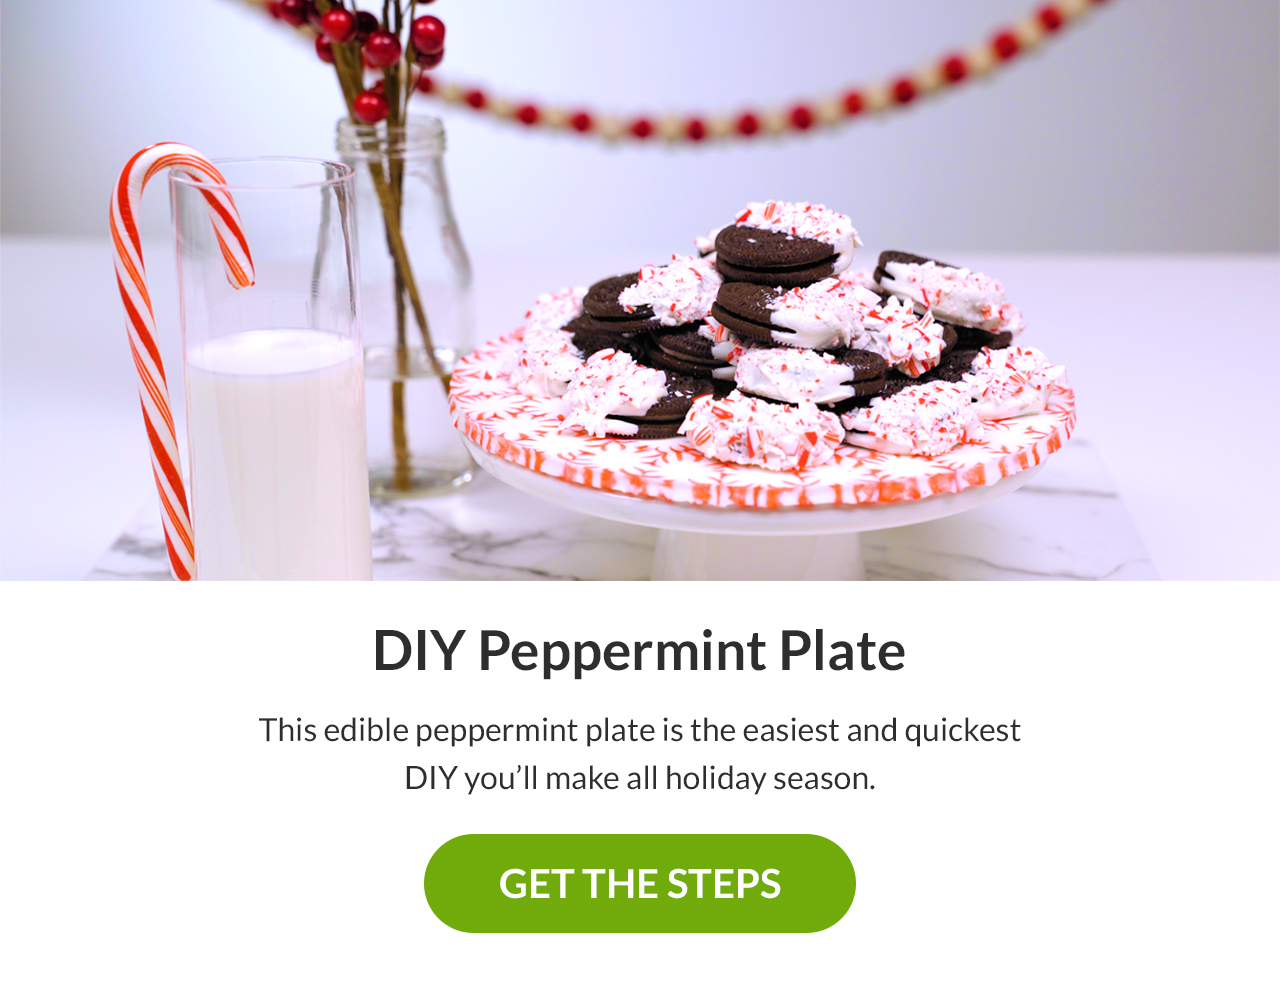 DIY Peppermint Plate. GET THE STEPS!